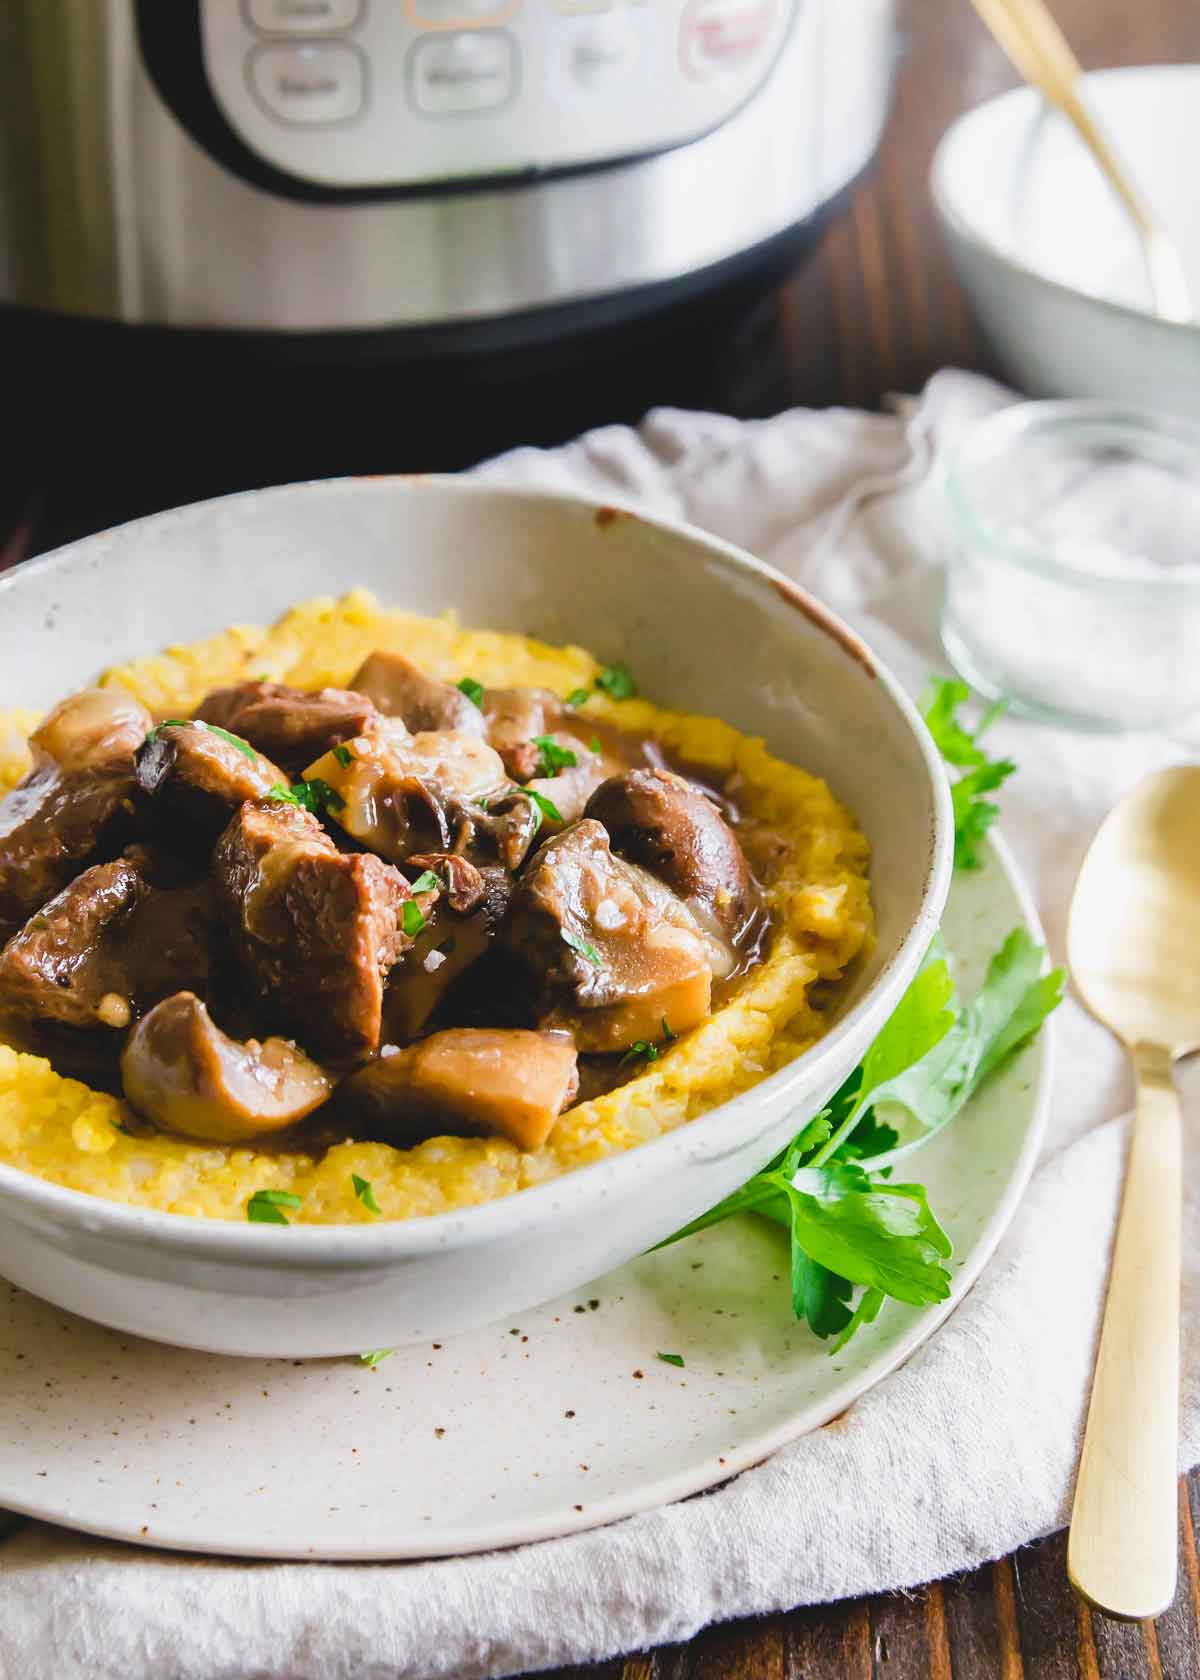 This beef and mushroom stew made in the Instant Pot is a hearty, comforting, stick to your ribs kind of meal that's perfect for winter.